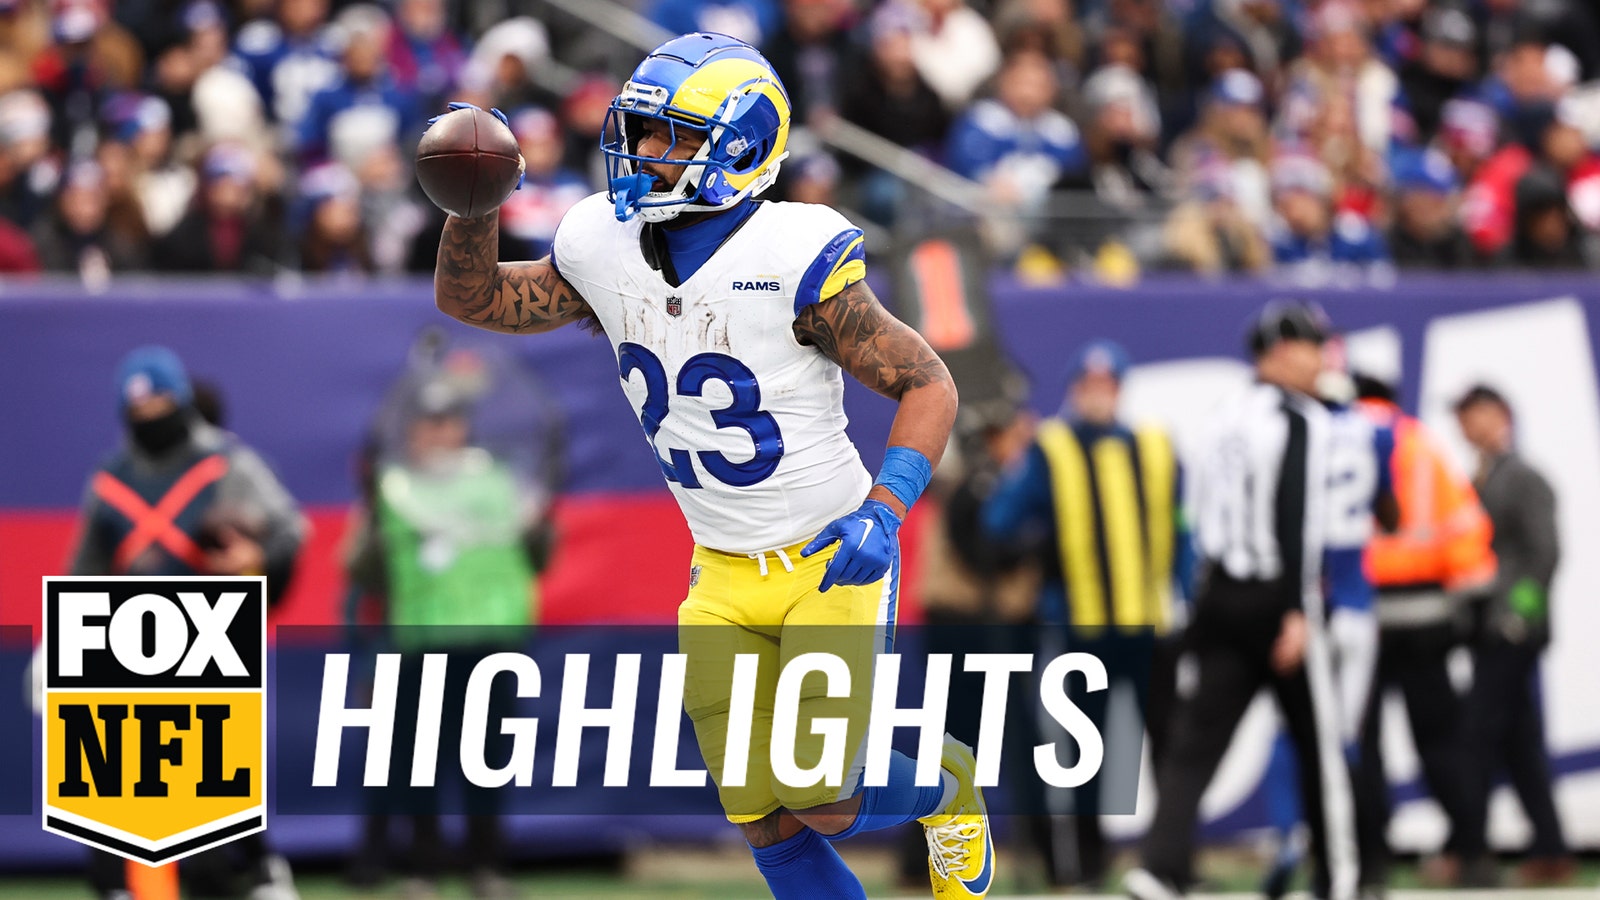 Kyren Williams has a MONSTER game with three TDs in Rams' 26-25 win vs. Giants | NFL Highlights